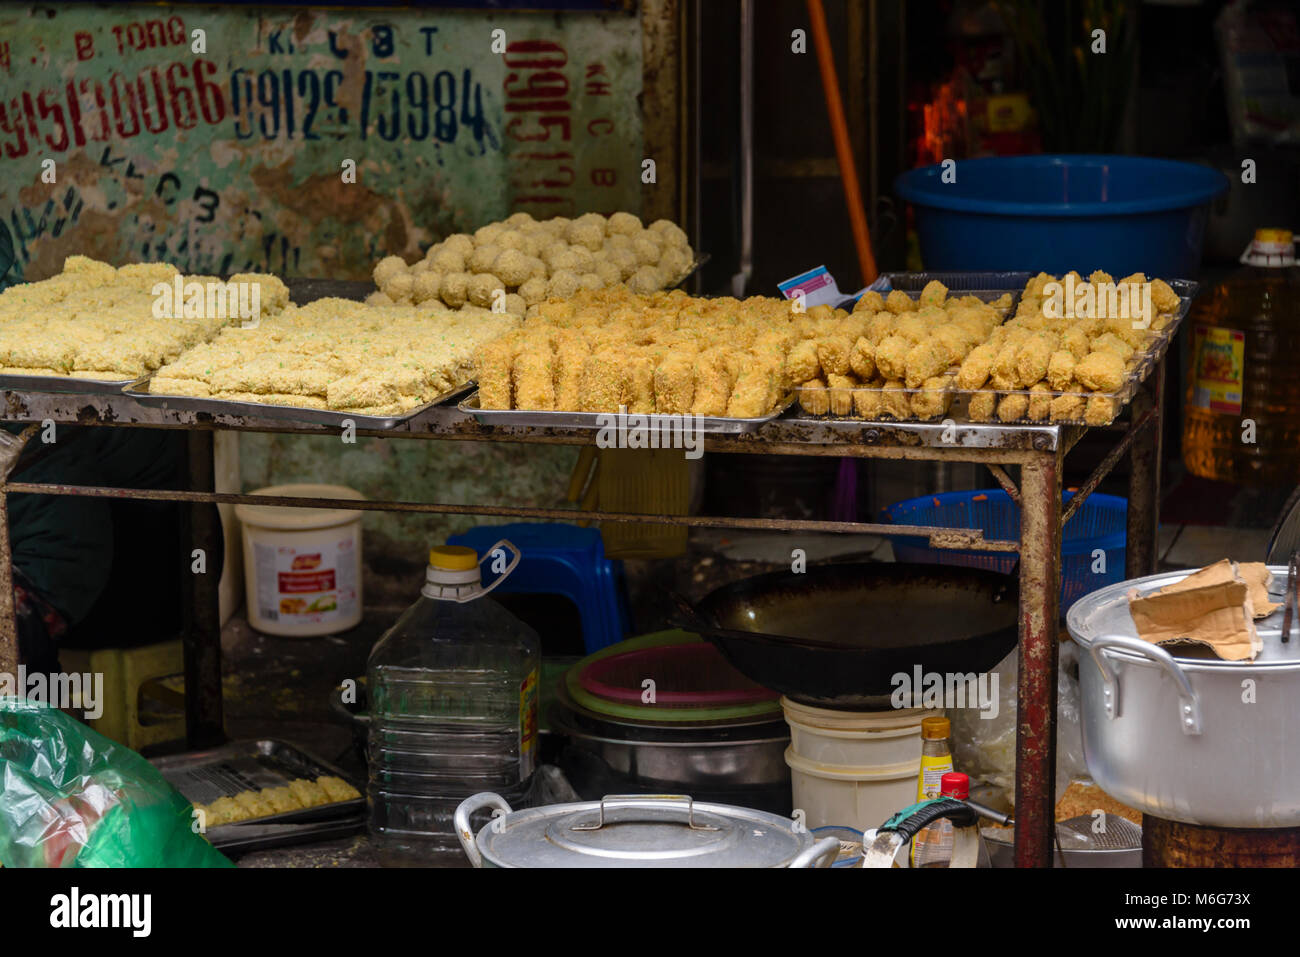 Street taro for sale, snacks which contain boiled quails eggs, pork or beef, wrapped in flour and potato, and deep fried. in Hanoi, Vietnam Stock Photo